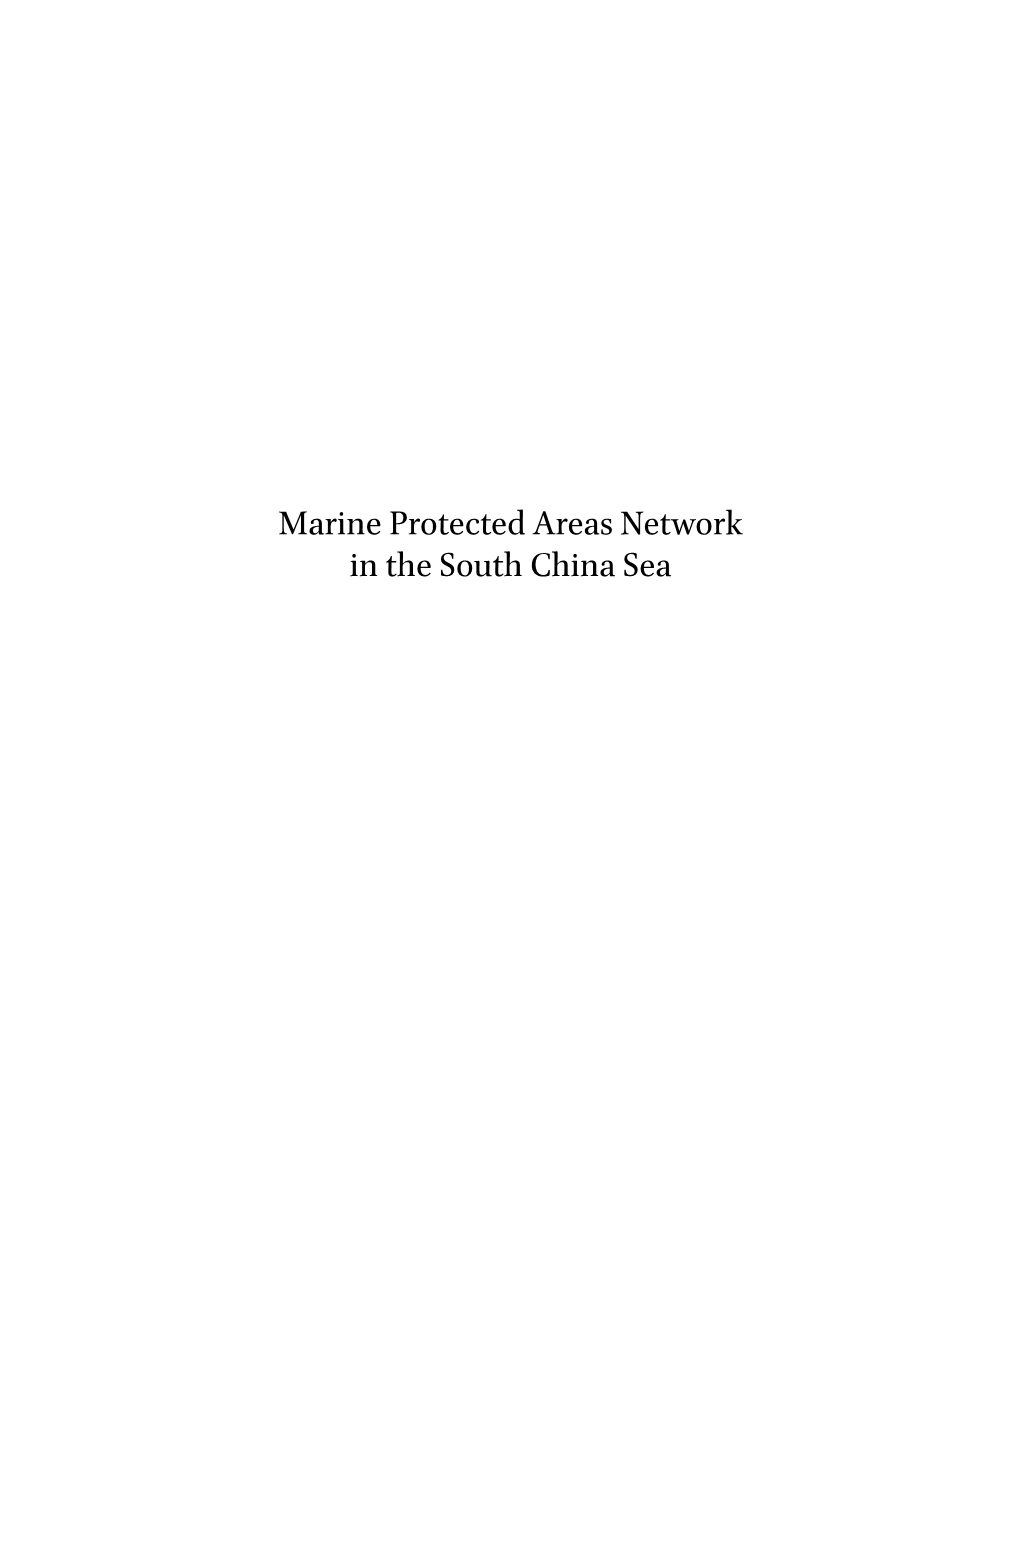 Marine Protected Areas Network in the South China Sea Legal Aspects of Sustainable Development